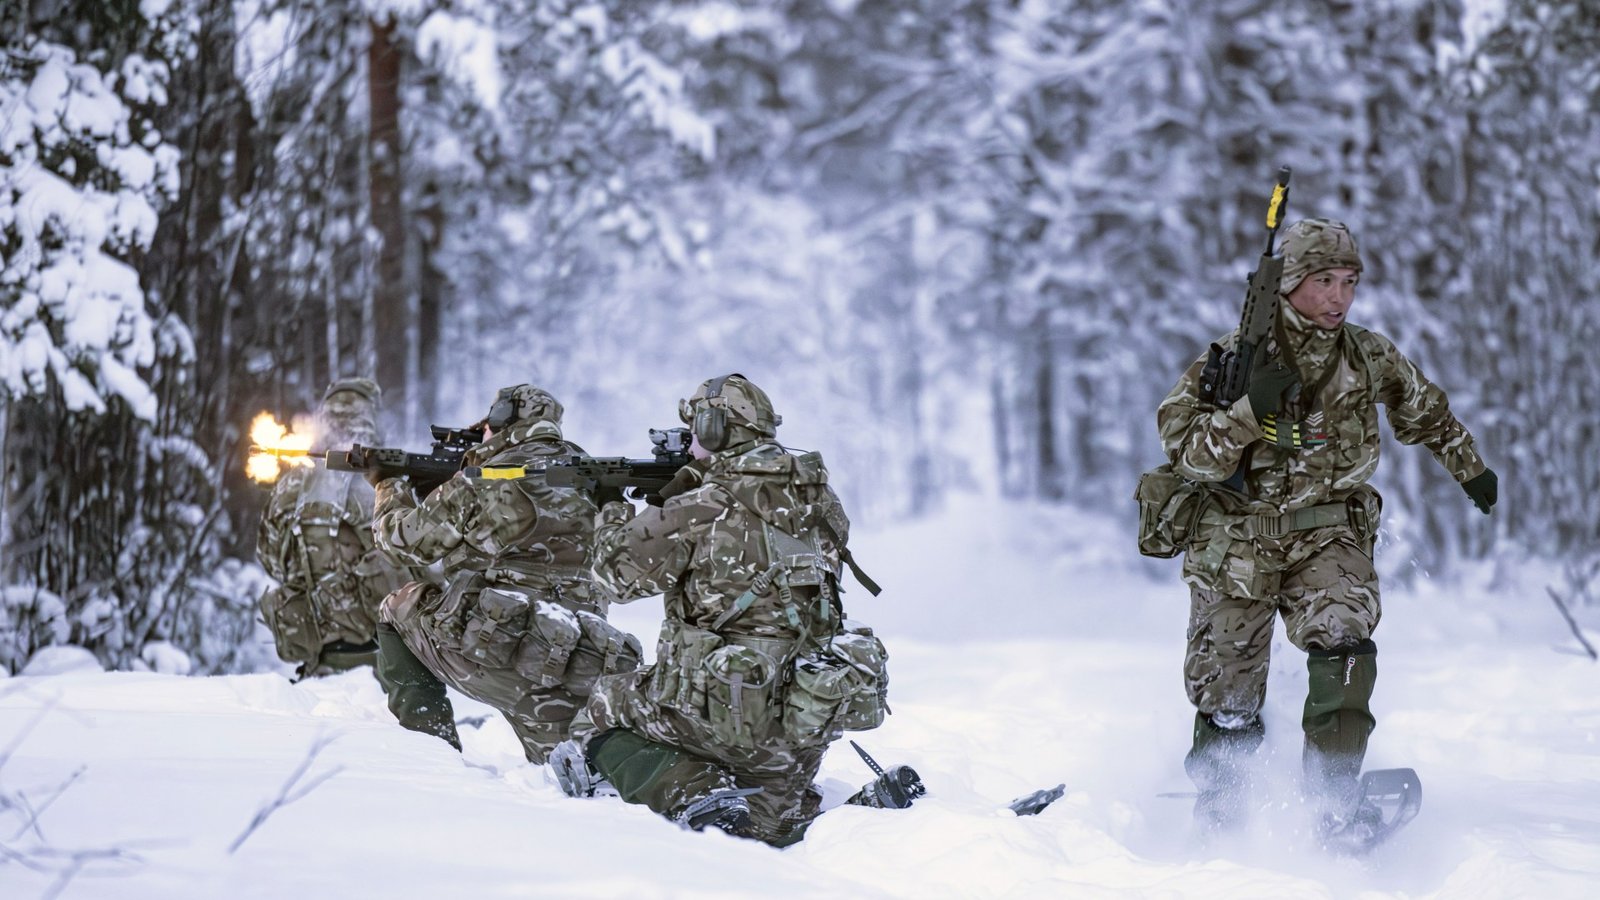 British troops train in Norwegian snow as they prepare for war in the Arctic